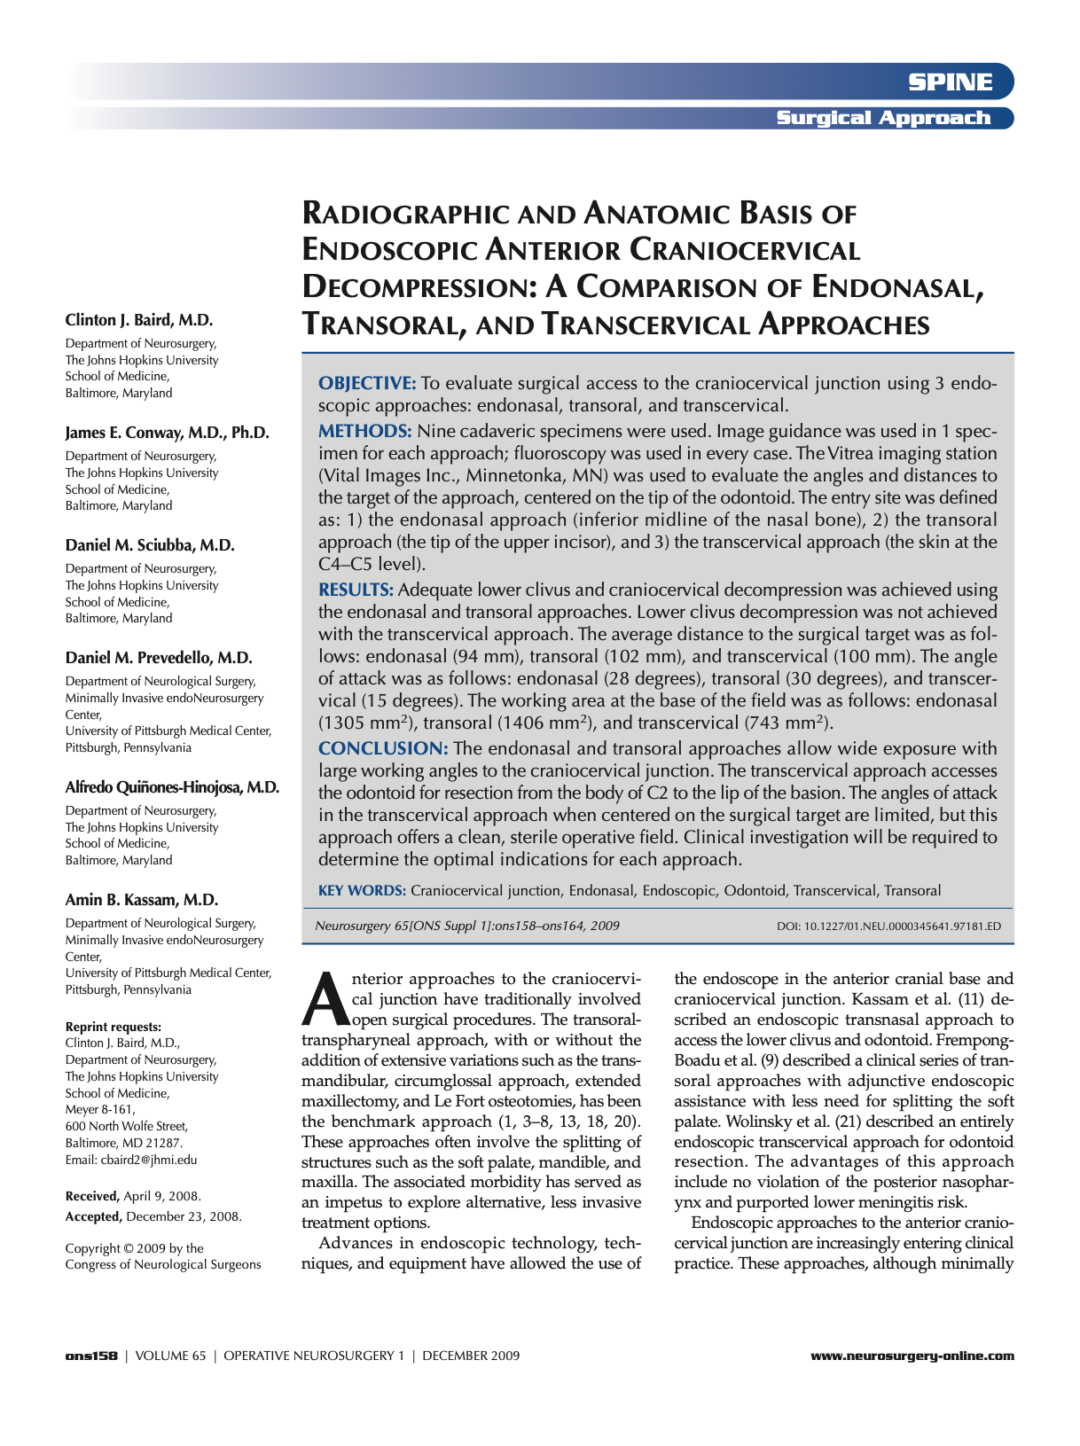 RADIOGRAPHIC AND ANATOMIC BASIS OF ENDOSCOPIC ANTERIOR CRANIOCERVICAL DECOMPRESSION: A COMPARISON OF ENDONASAL, TRANSORAL, AND TRANSCERVICAL APPROACHES